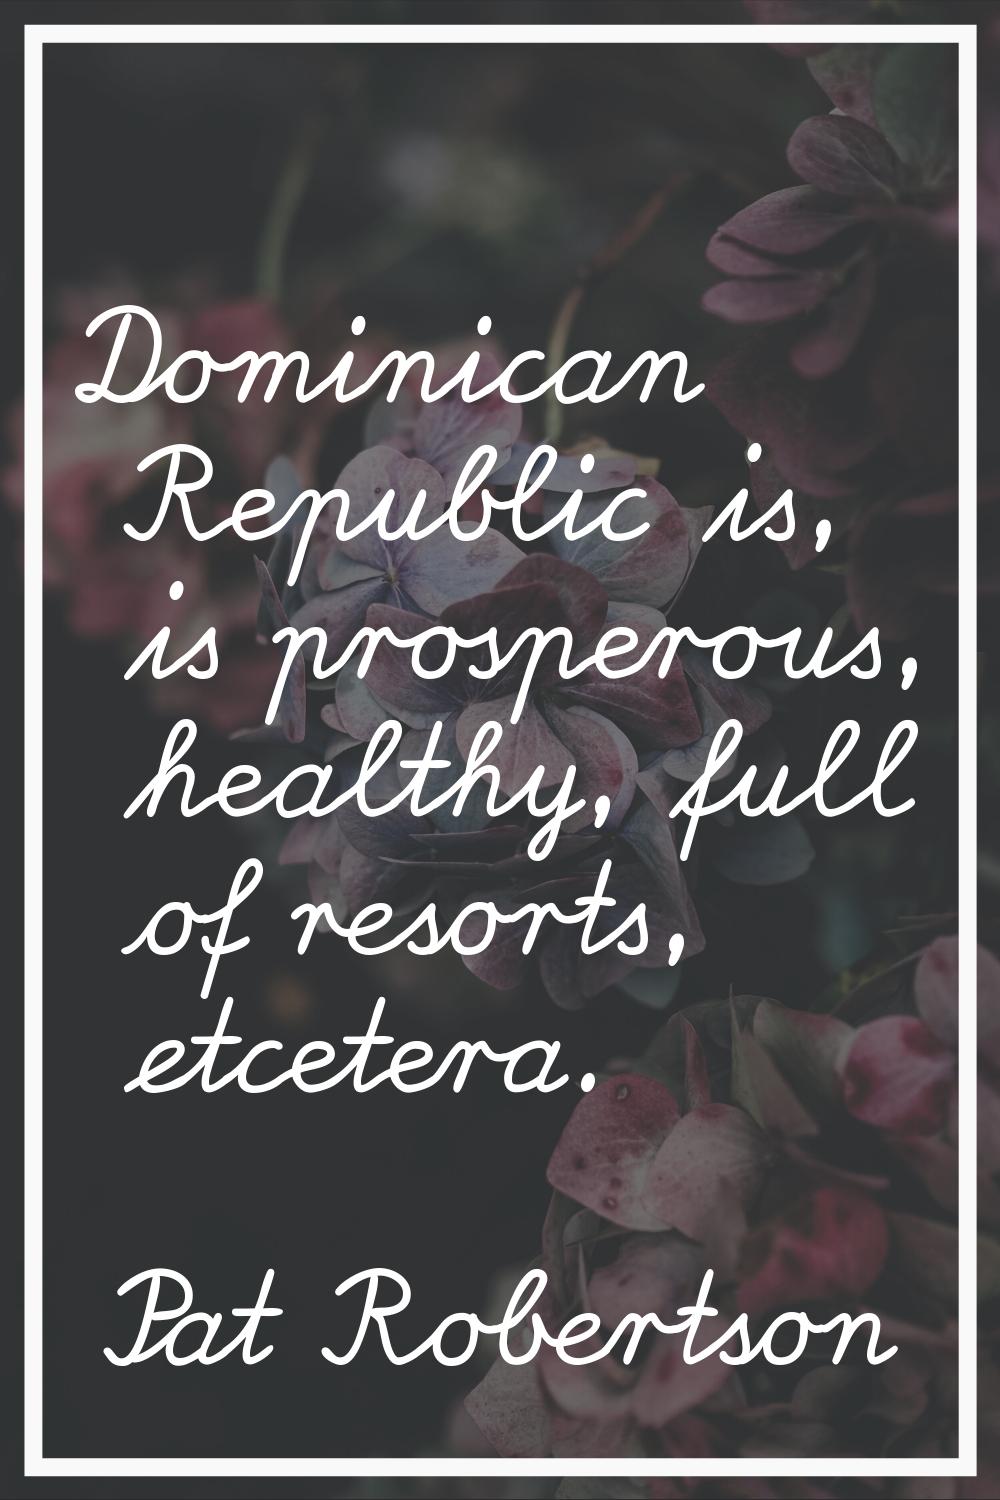 Dominican Republic is, is prosperous, healthy, full of resorts, etcetera.